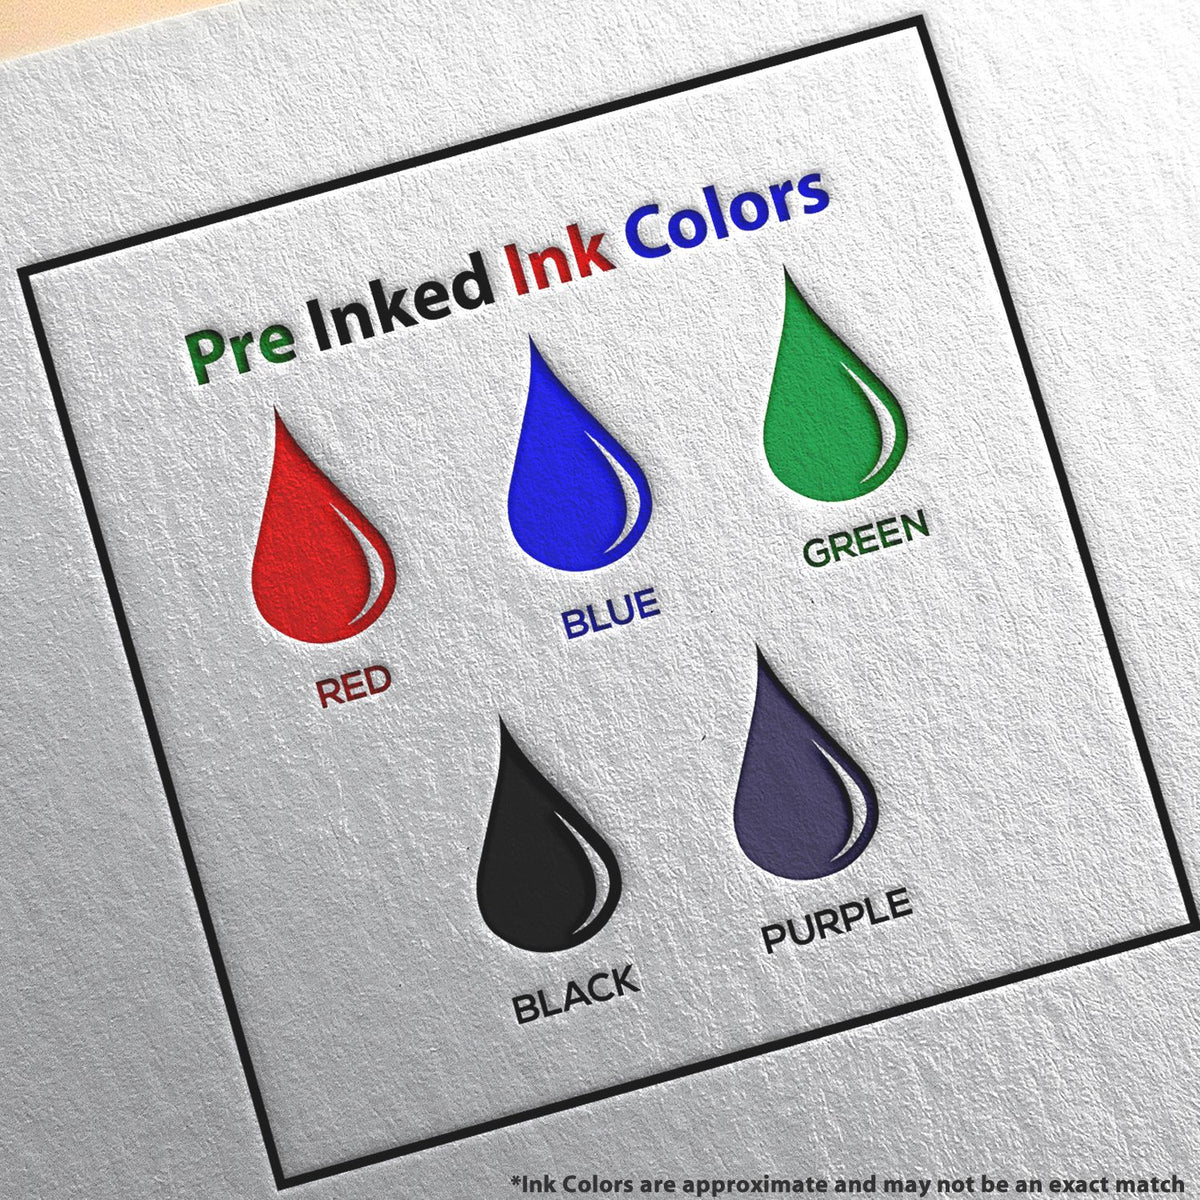 A picture showing the different ink colors or hues available for the Slim Pre-Inked Idaho Architect Seal Stamp product.